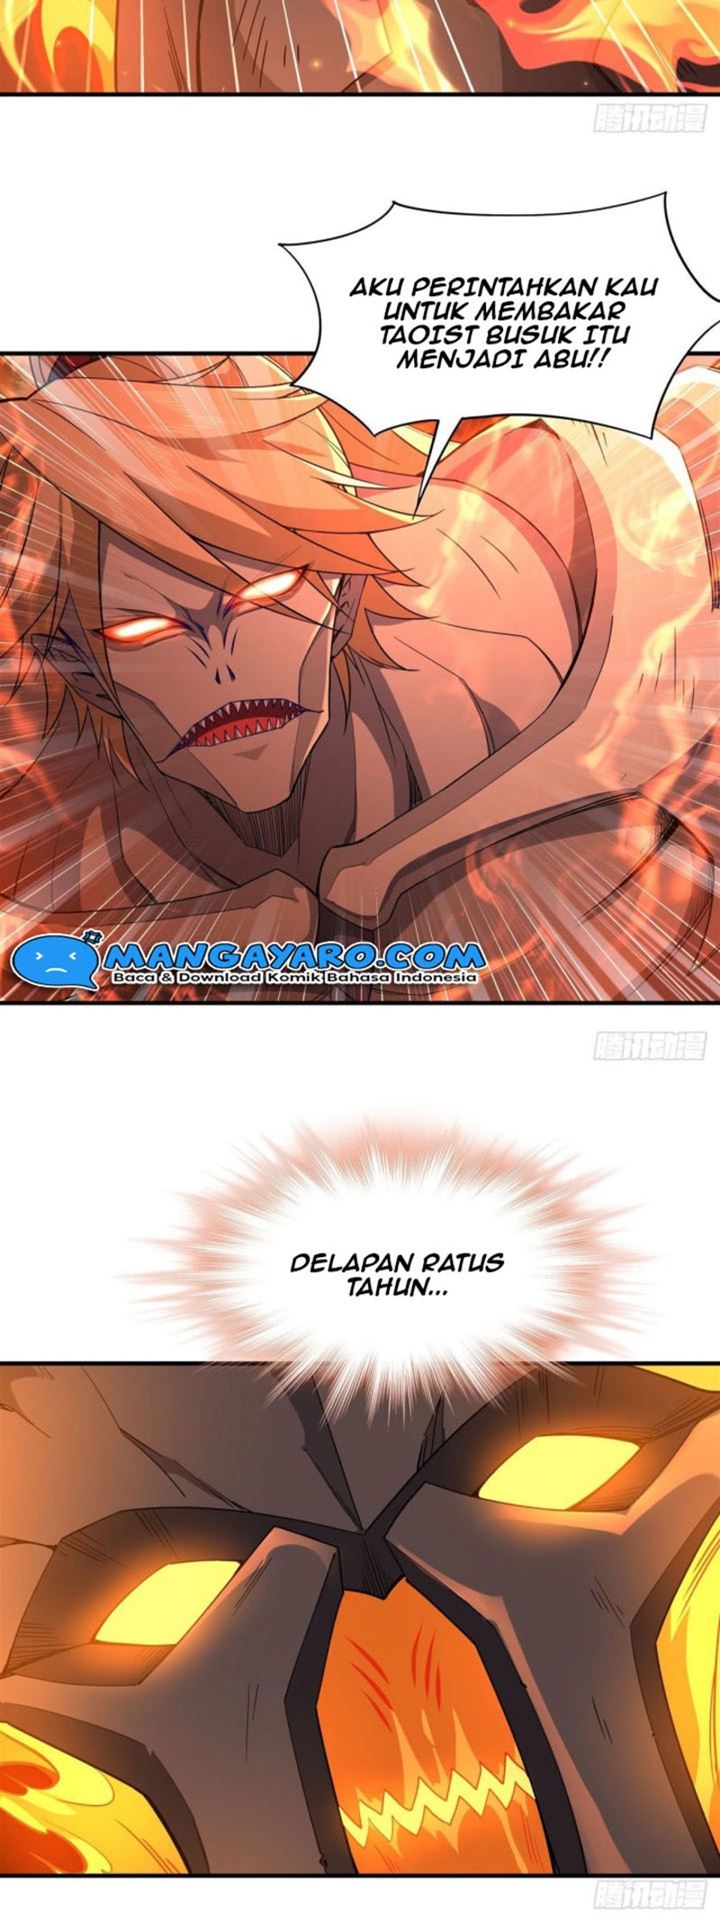 Dilarang COPAS - situs resmi www.mangacanblog.com - Komik my female apprentices are all big shots from the future 021 - chapter 21 22 Indonesia my female apprentices are all big shots from the future 021 - chapter 21 Terbaru 15|Baca Manga Komik Indonesia|Mangacan